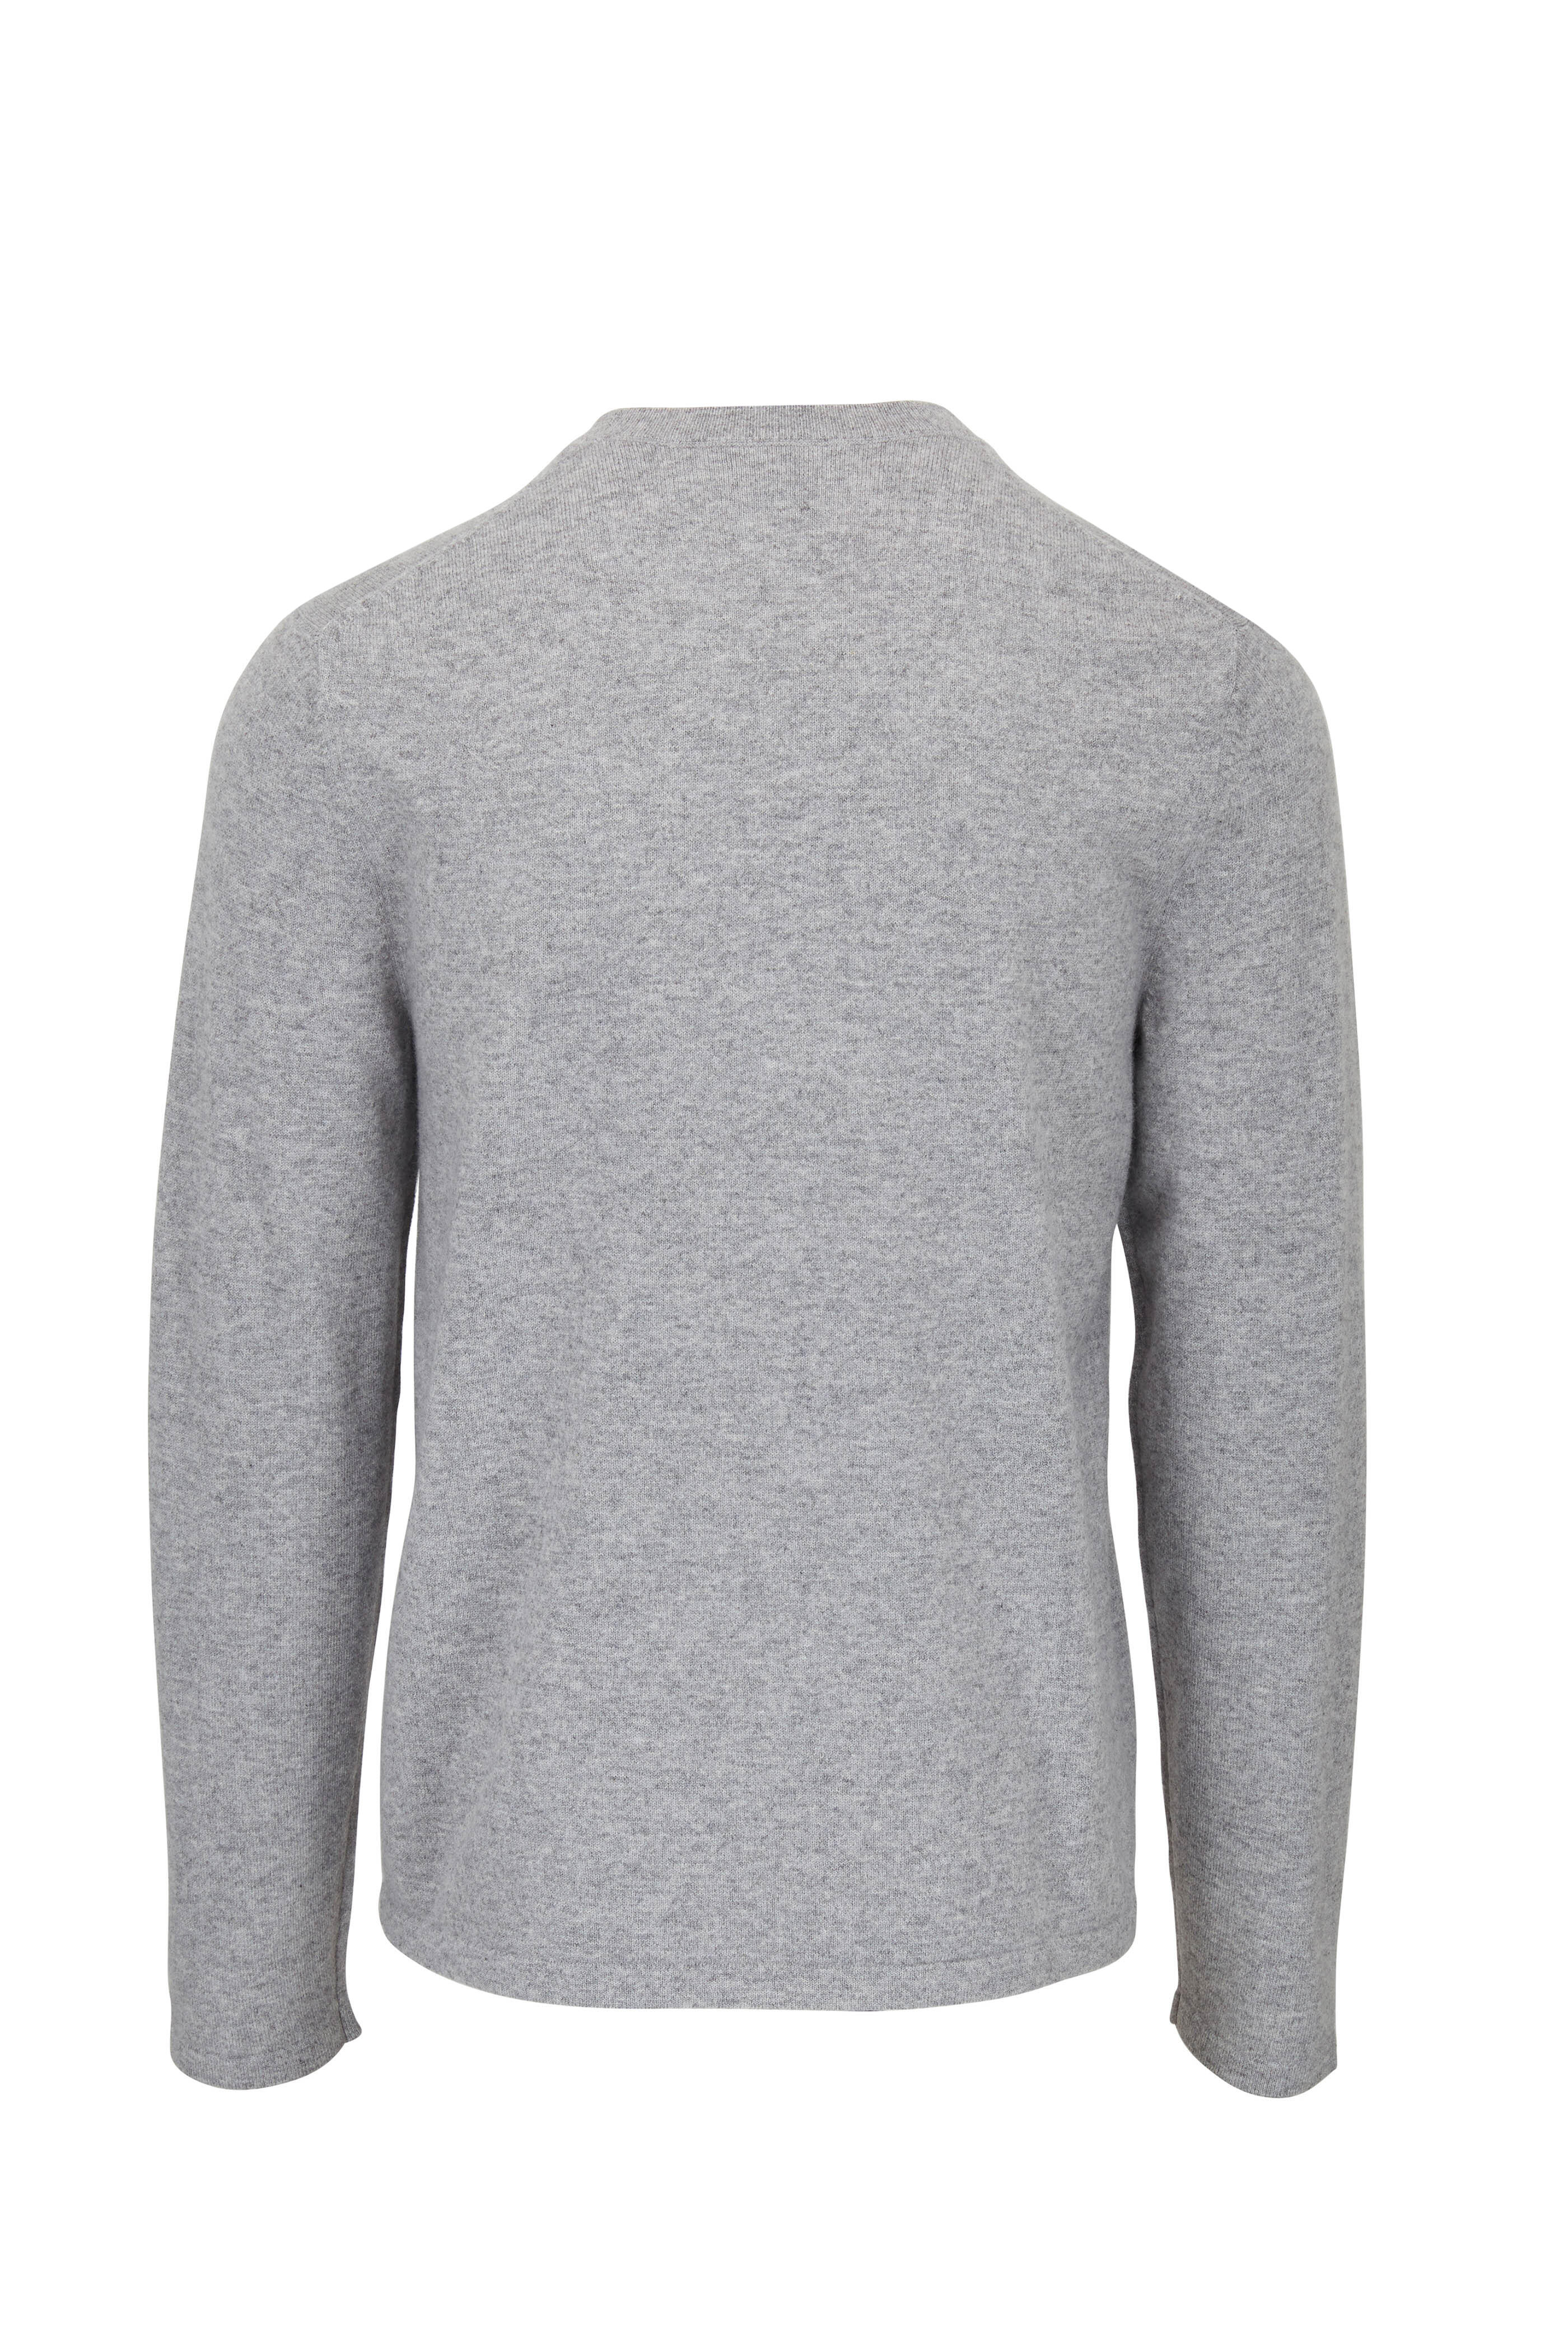 Vince - Gray Cashmere Crewneck Pullover | Mitchell Stores